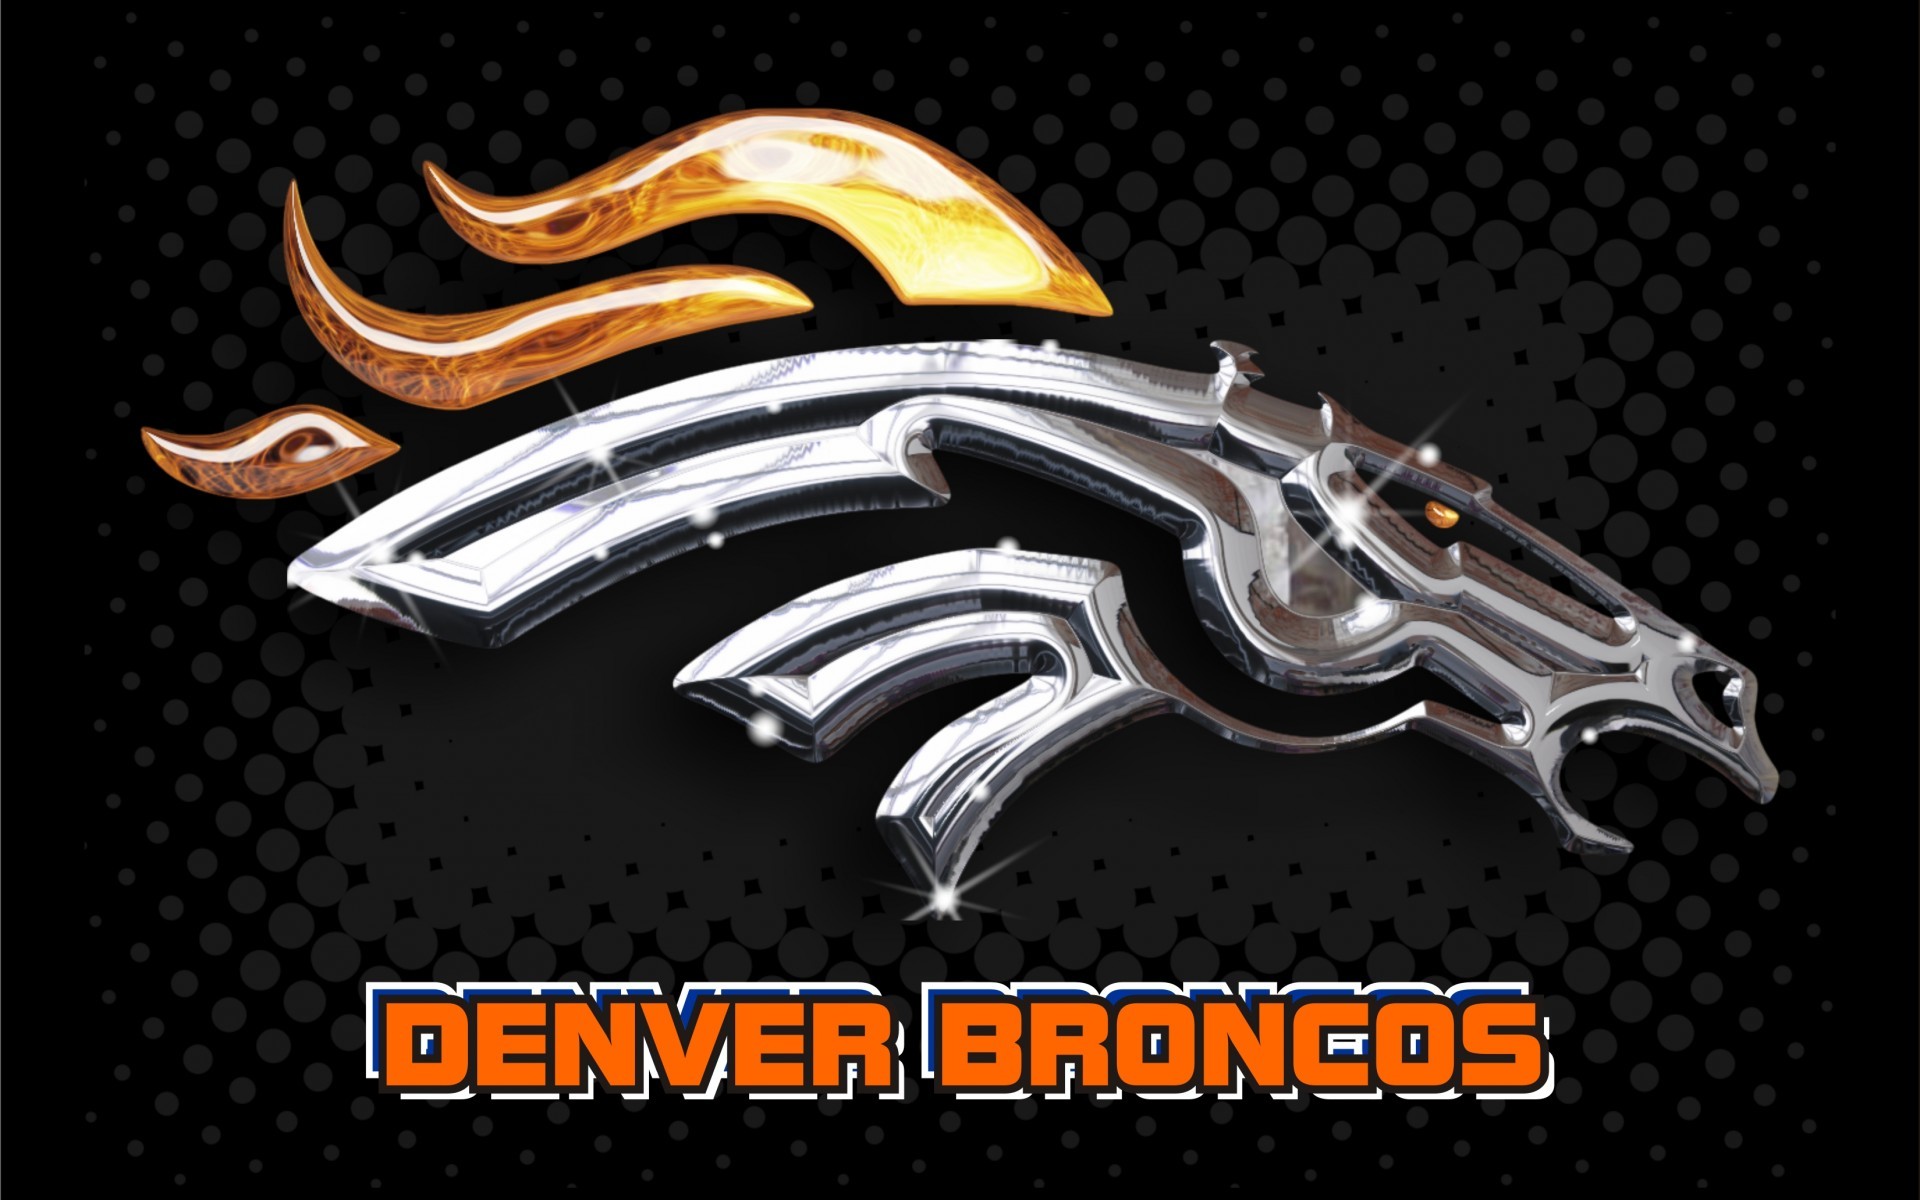 1920x1200 (id 100132833 2018) Cool Denver Broncos Wallpapers